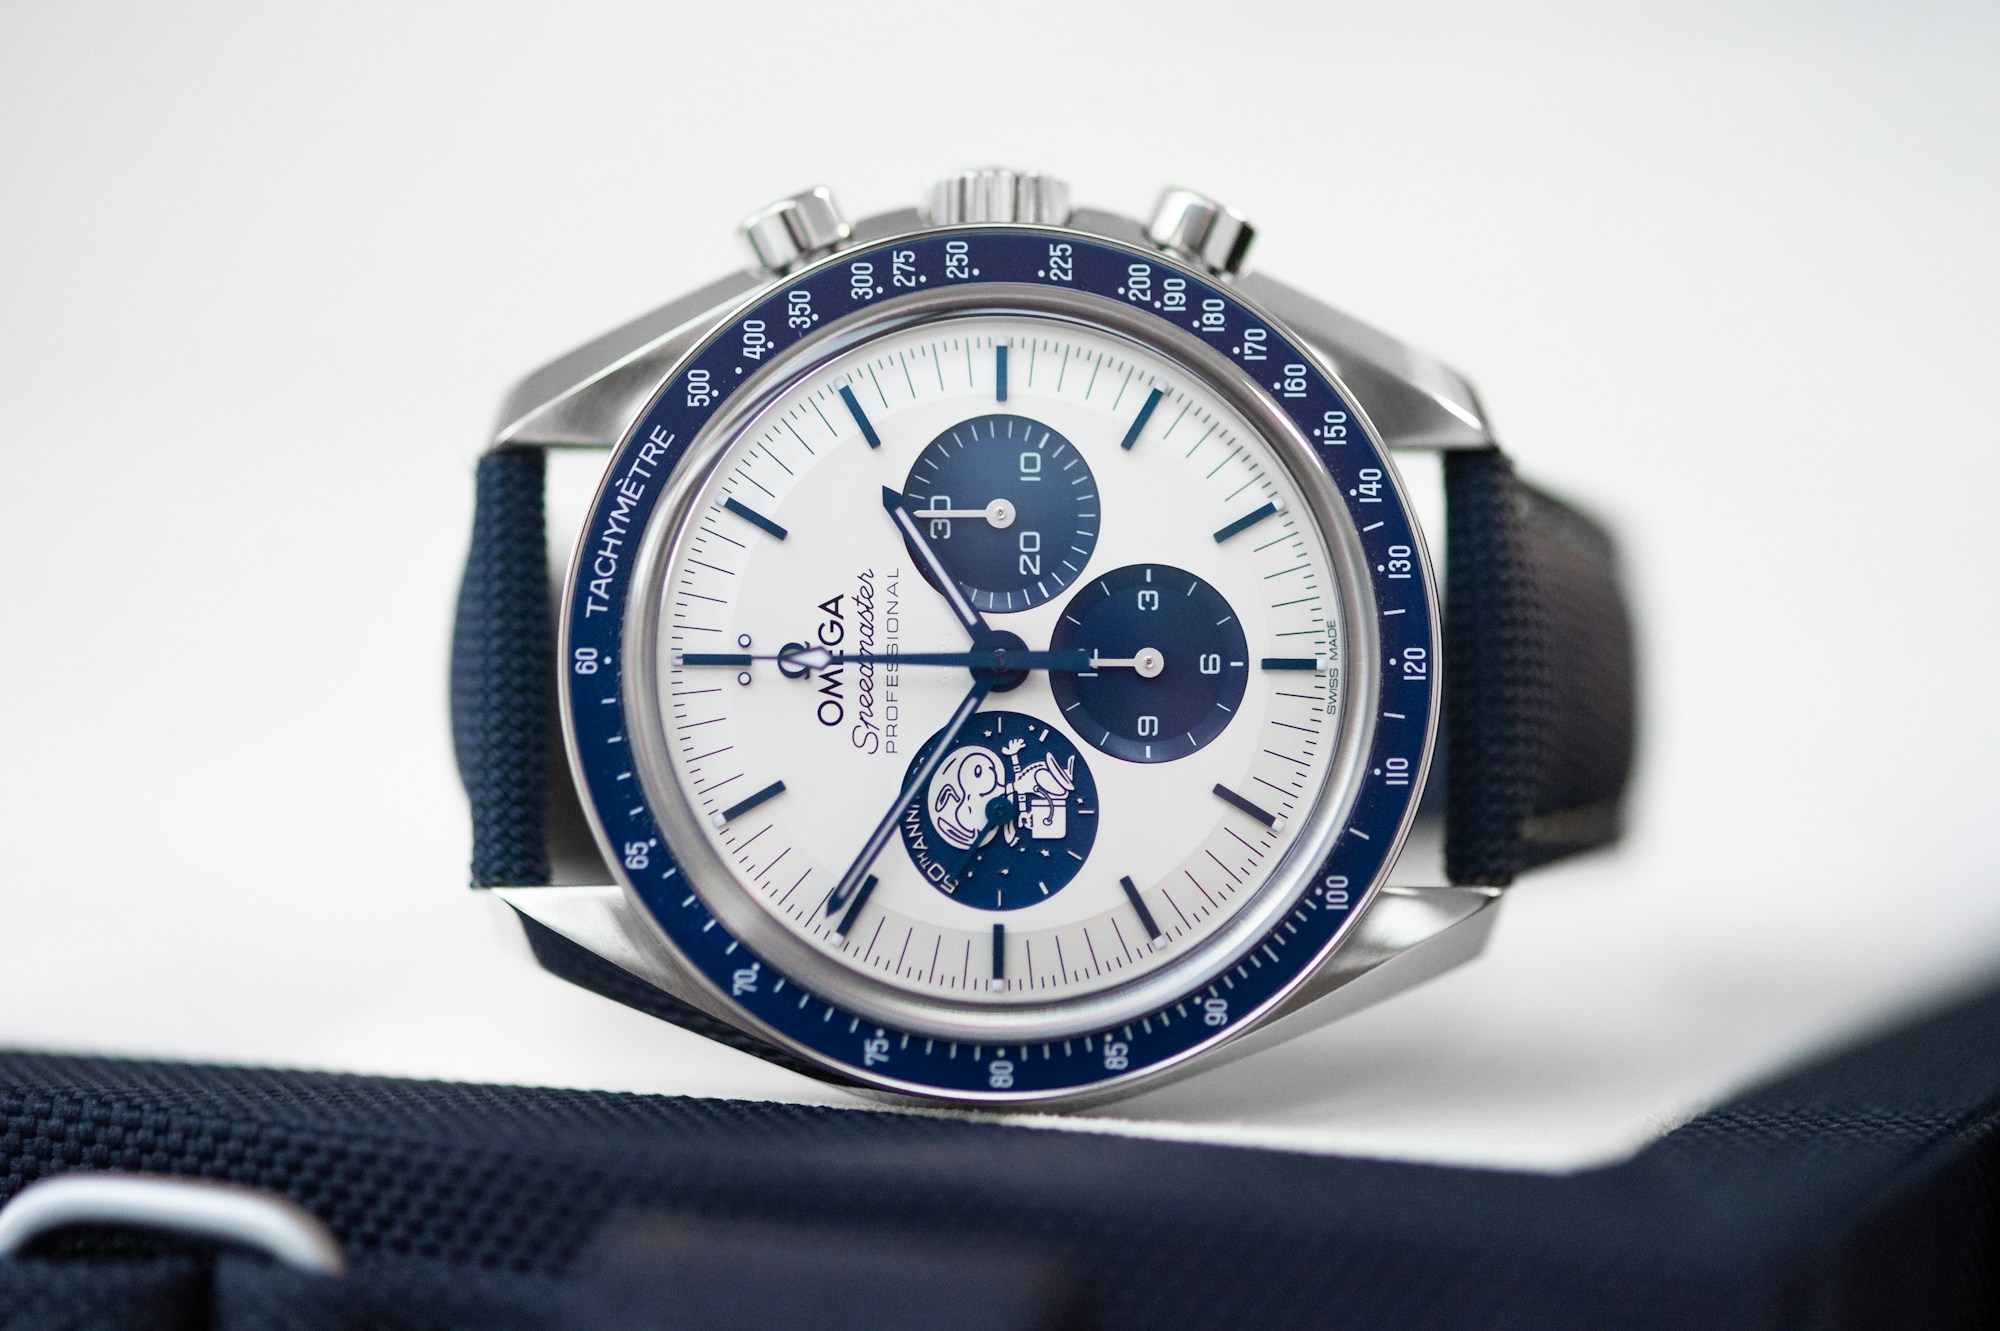 How Snoopy Ended Up on an Omega Speedmaster Dial